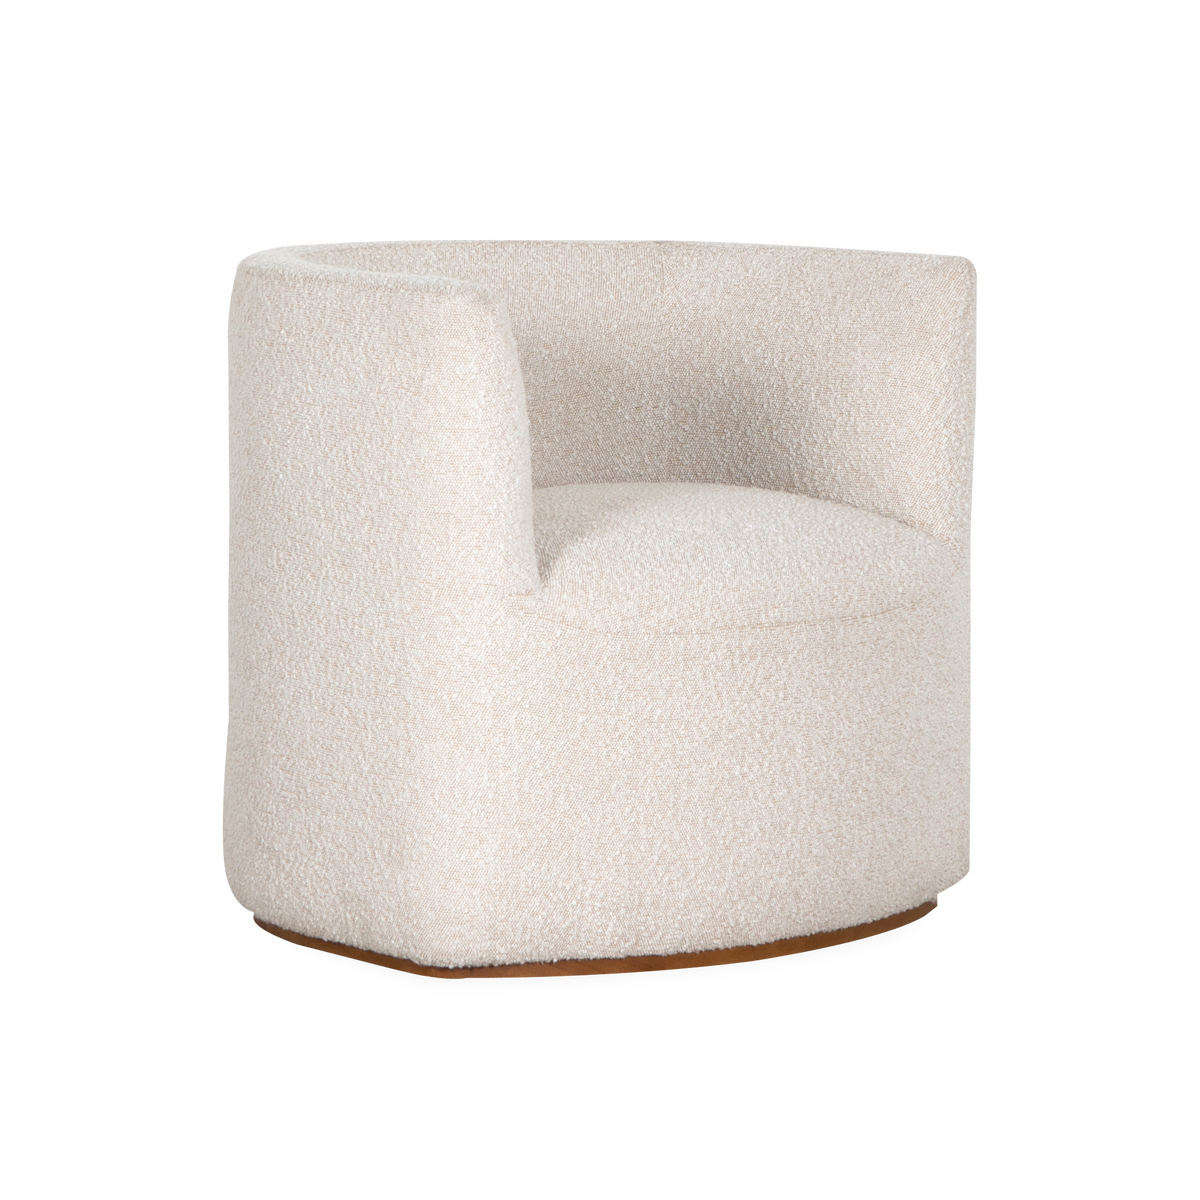 Intriguing while inviting, the Palmo Lounge Chair offers a cozy contemporary look with a slight vintage feel.